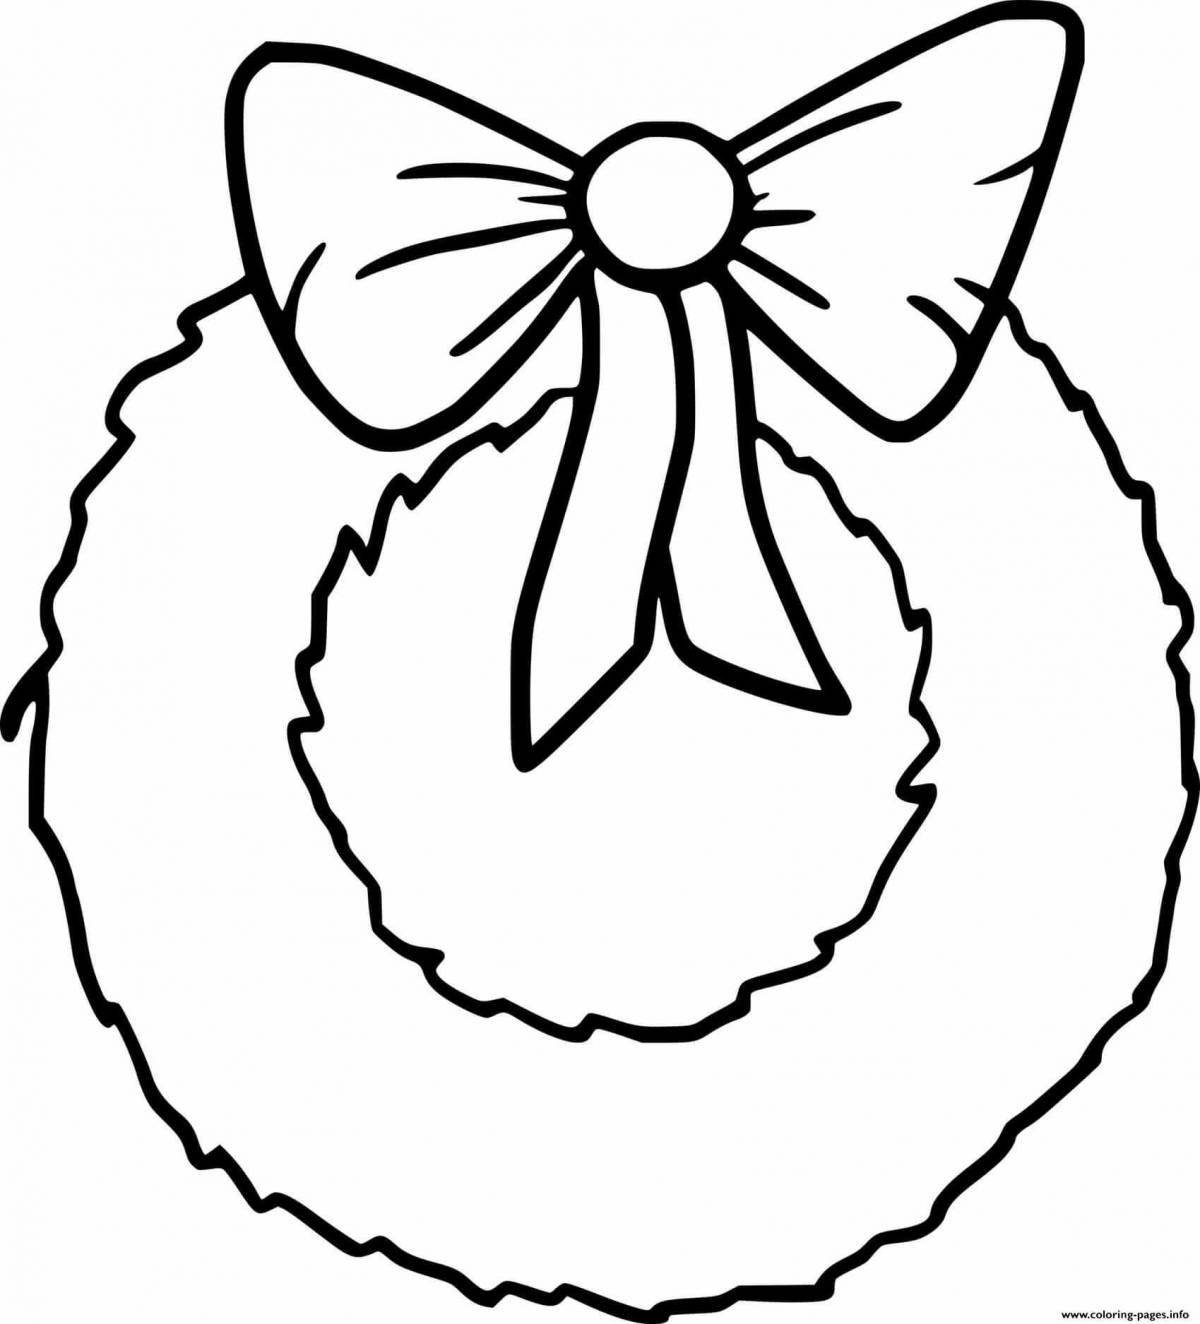 Magic bow coloring page